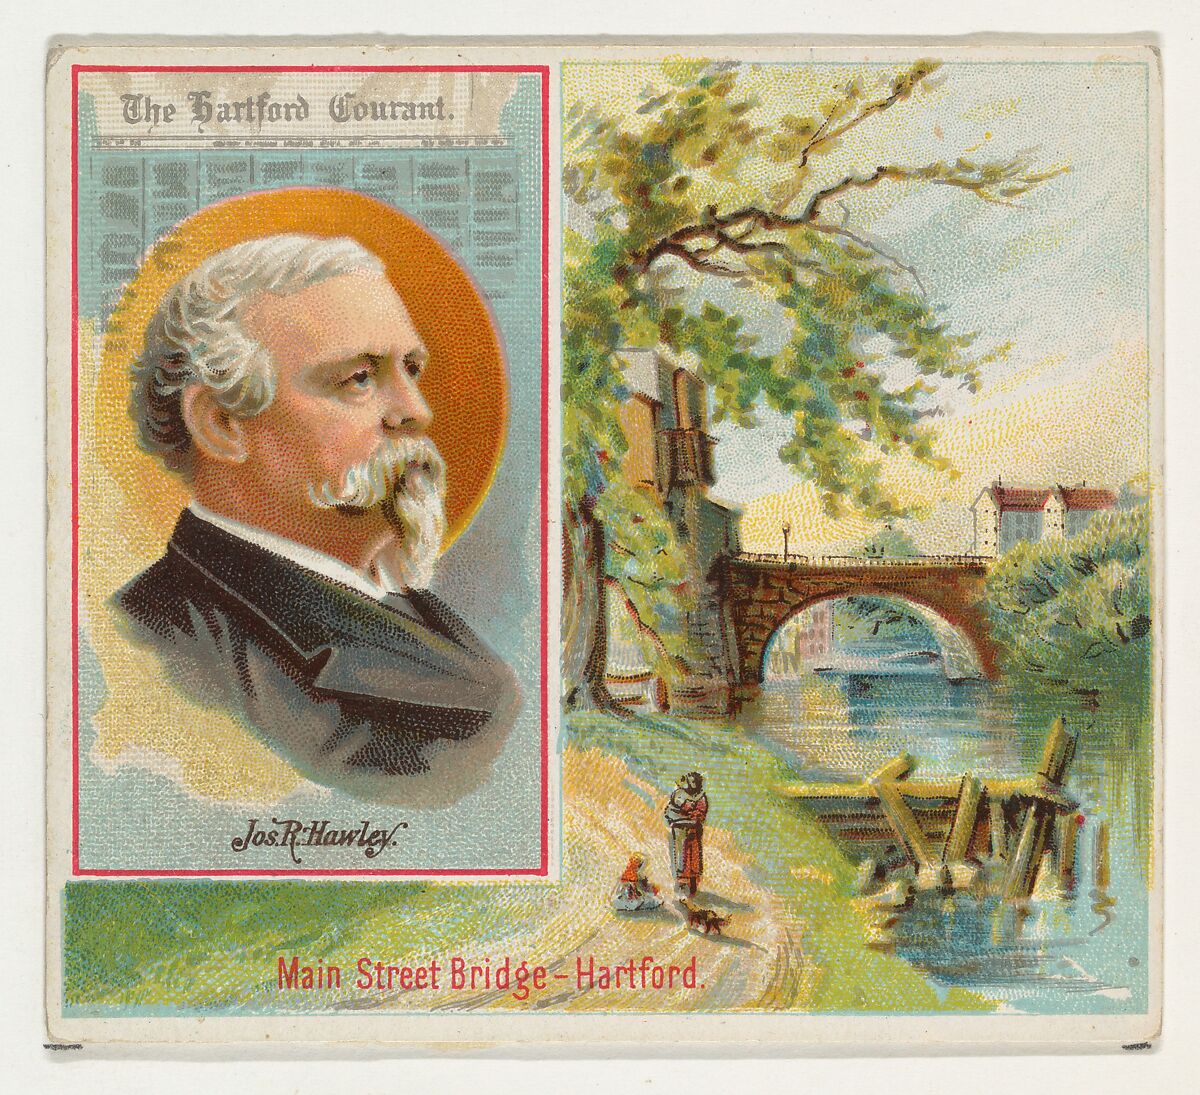 Joseph R. Hawley, The Hartford Courant, from the American Editors series (N35) for Allen & Ginter Cigarettes, Issued by Allen &amp; Ginter (American, Richmond, Virginia), Commercial color lithograph 